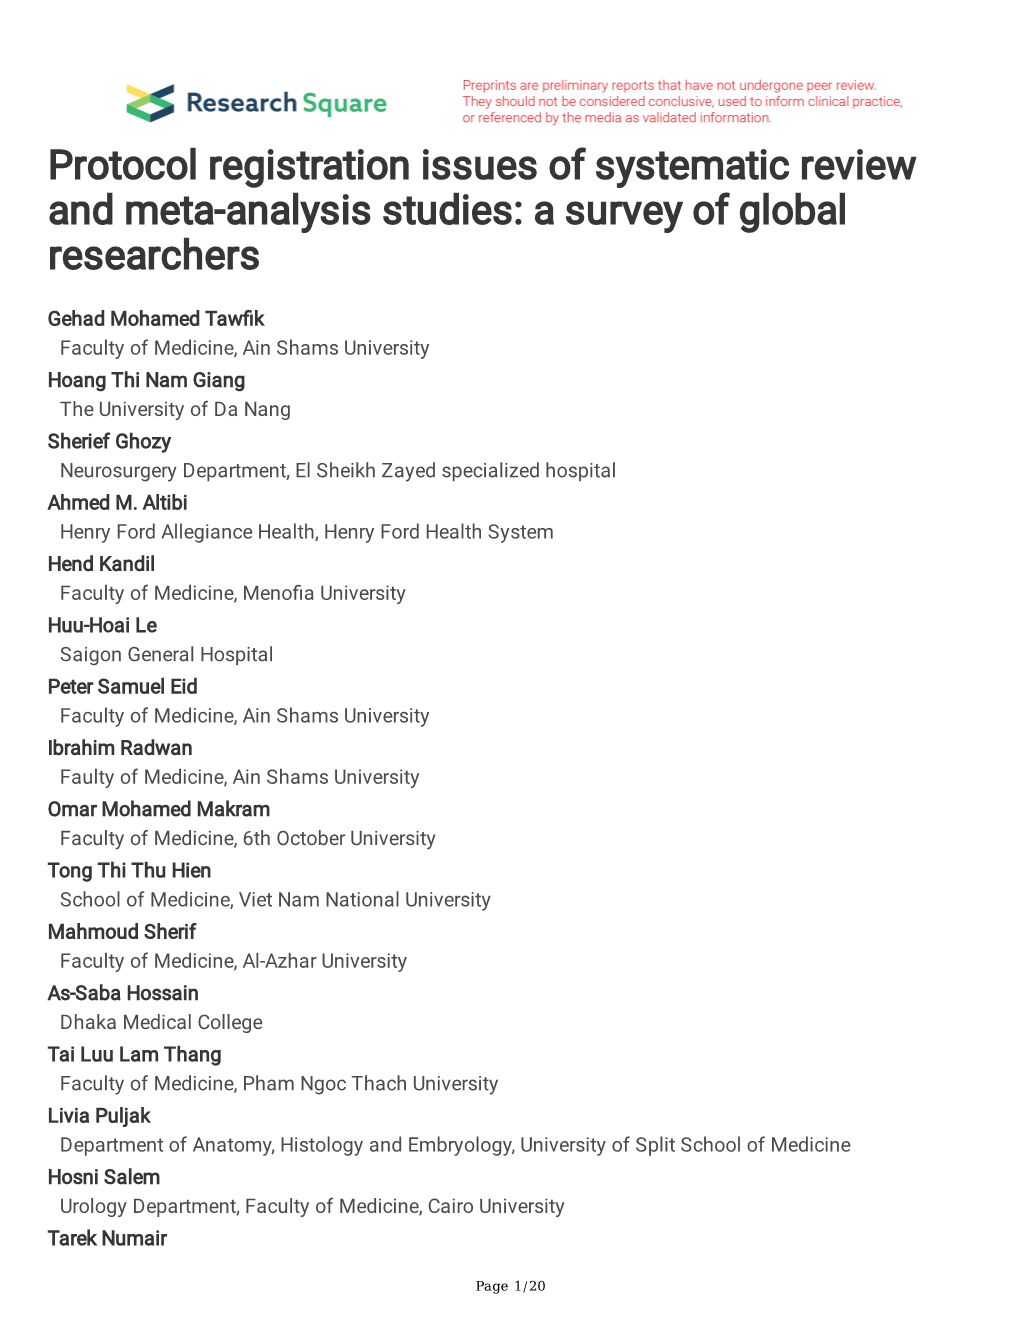 Protocol Registration Issues of Systematic Review and Meta-Analysis Studies: a Survey of Global Researchers